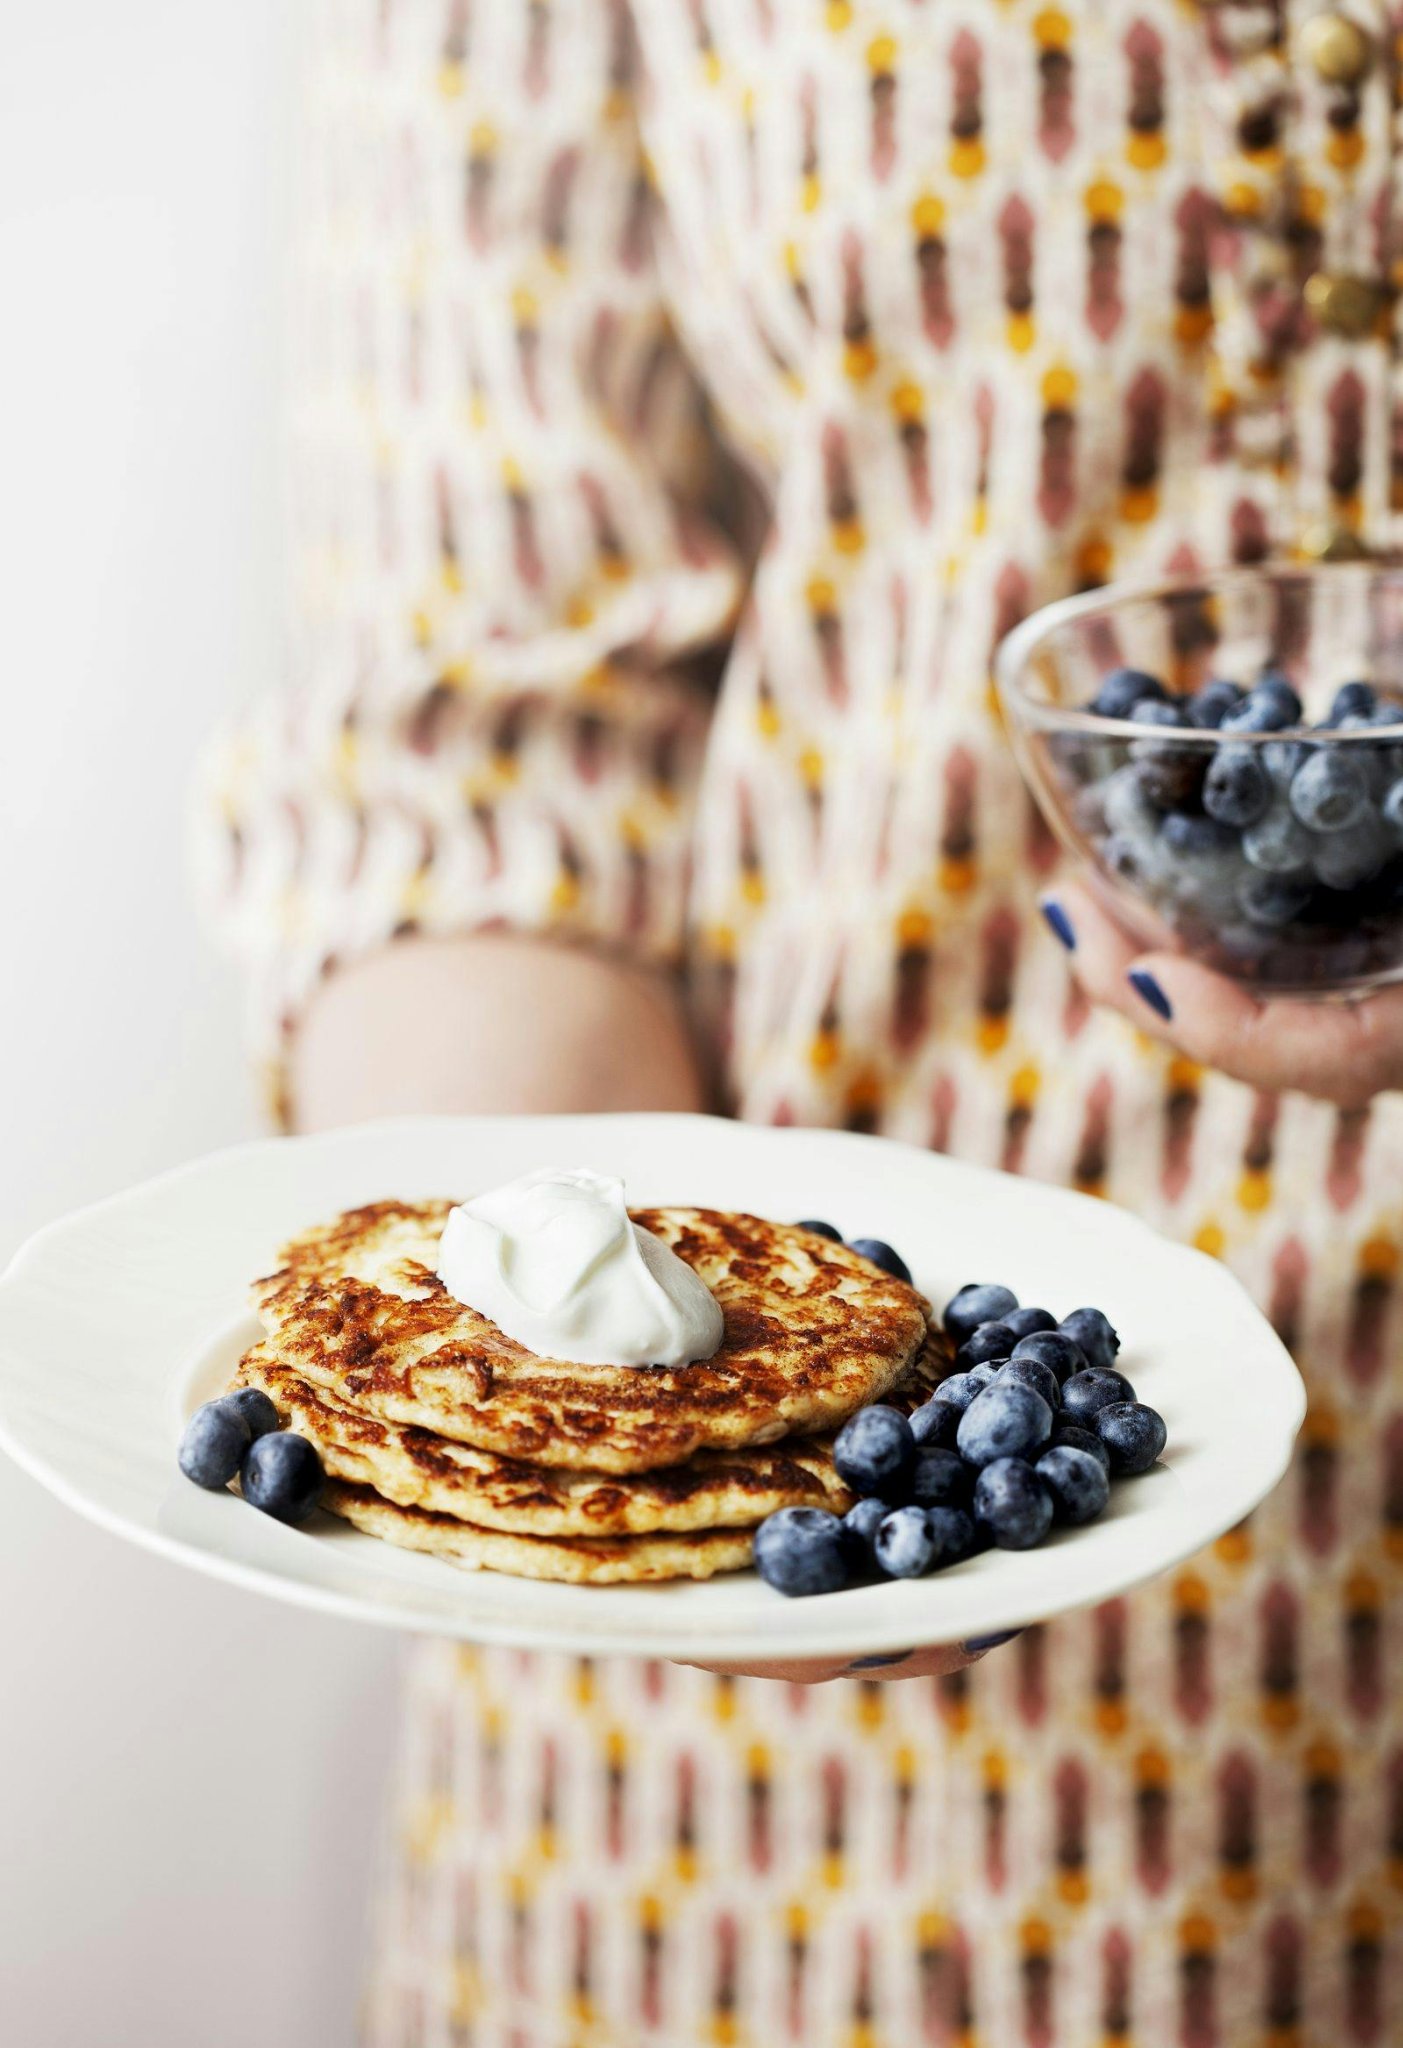 Keto Pancakes with Berries and Cream